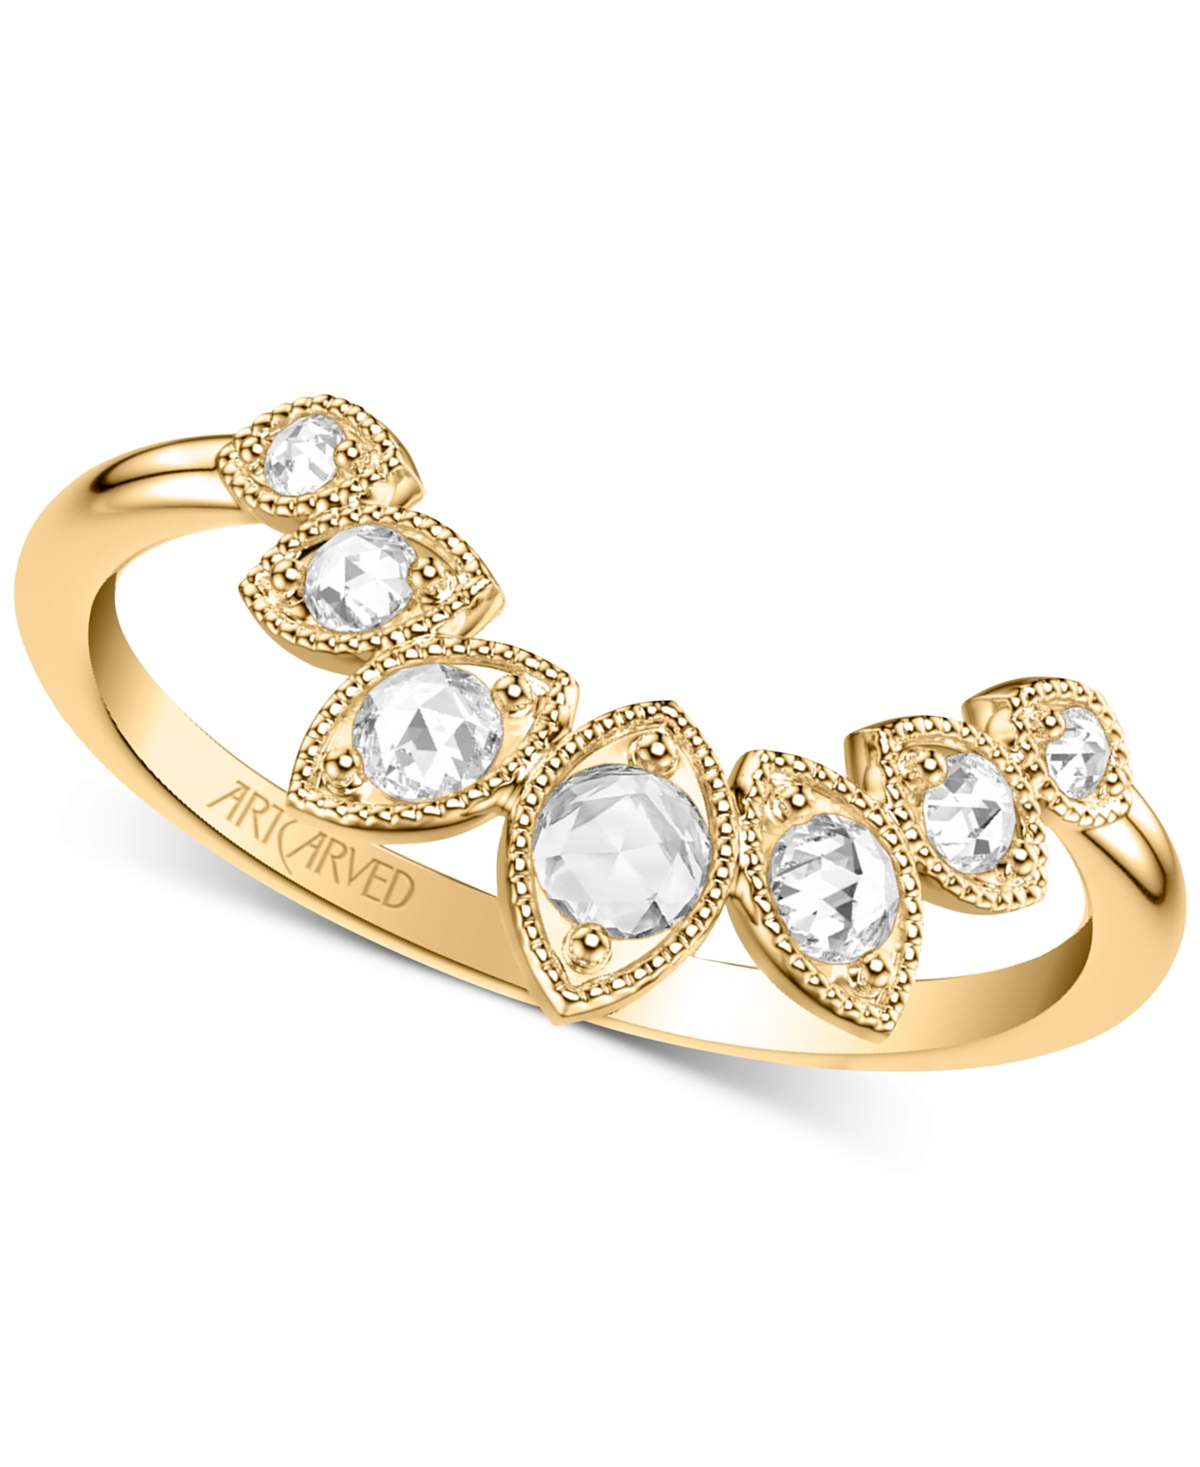 Artcarved Art Carved Diamond Rose-Cut Milgrain Wedding Band (1/5 ct. t.w.) in 14k White, Yellow or Rose Gold